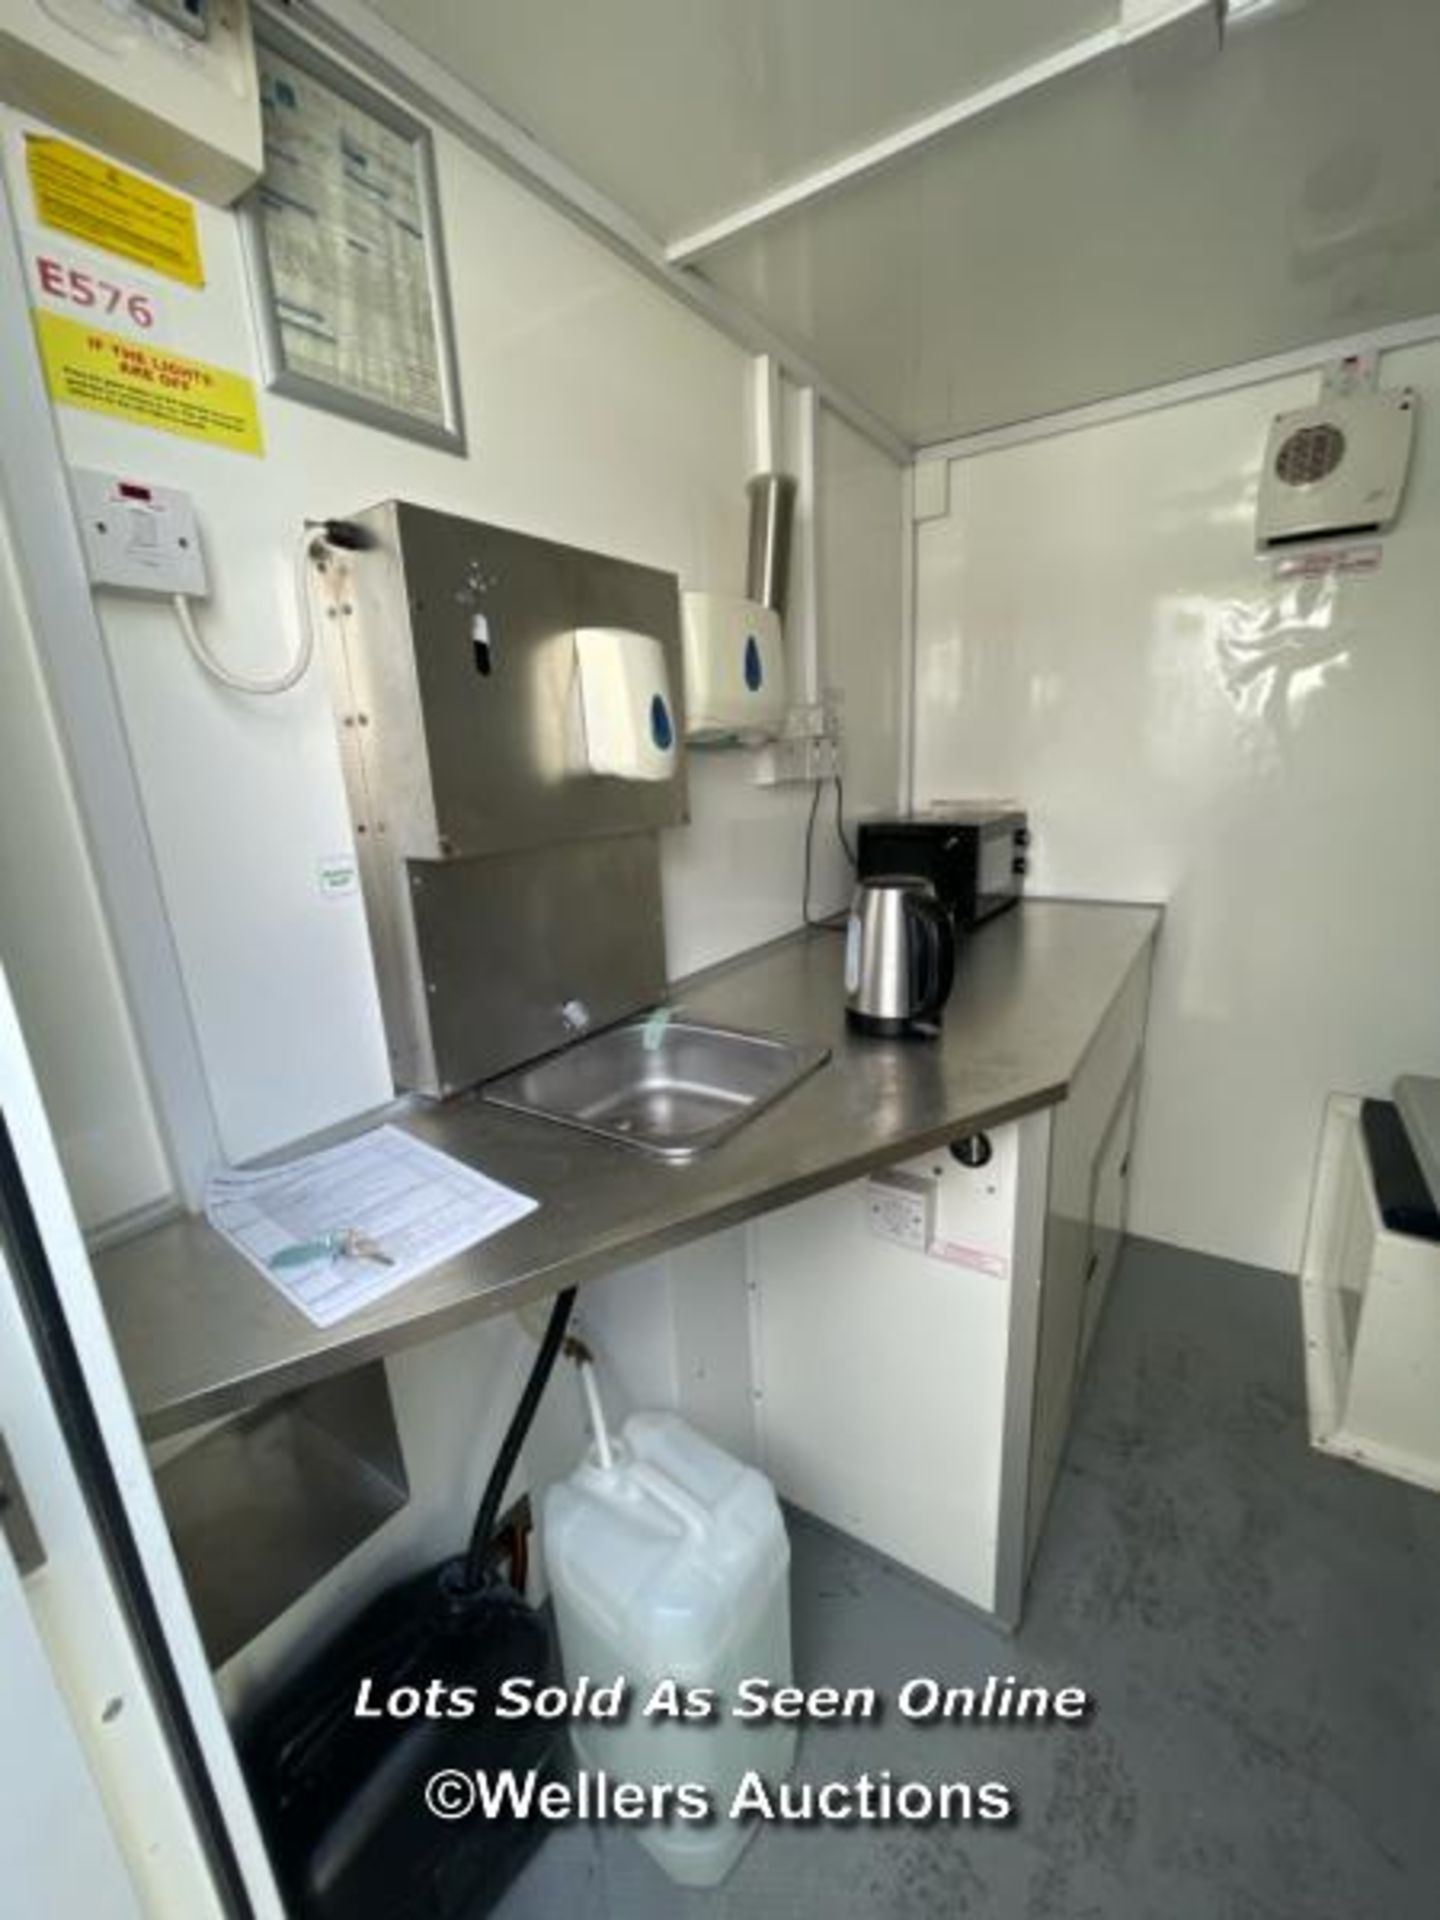 6 PERSON 12 X 7.5FT AJC EASY CABIN TOWABLE WELFARE UNIT, INCLUDES WASH BASIN, KETTLE, MICROWAVE, - Image 8 of 20